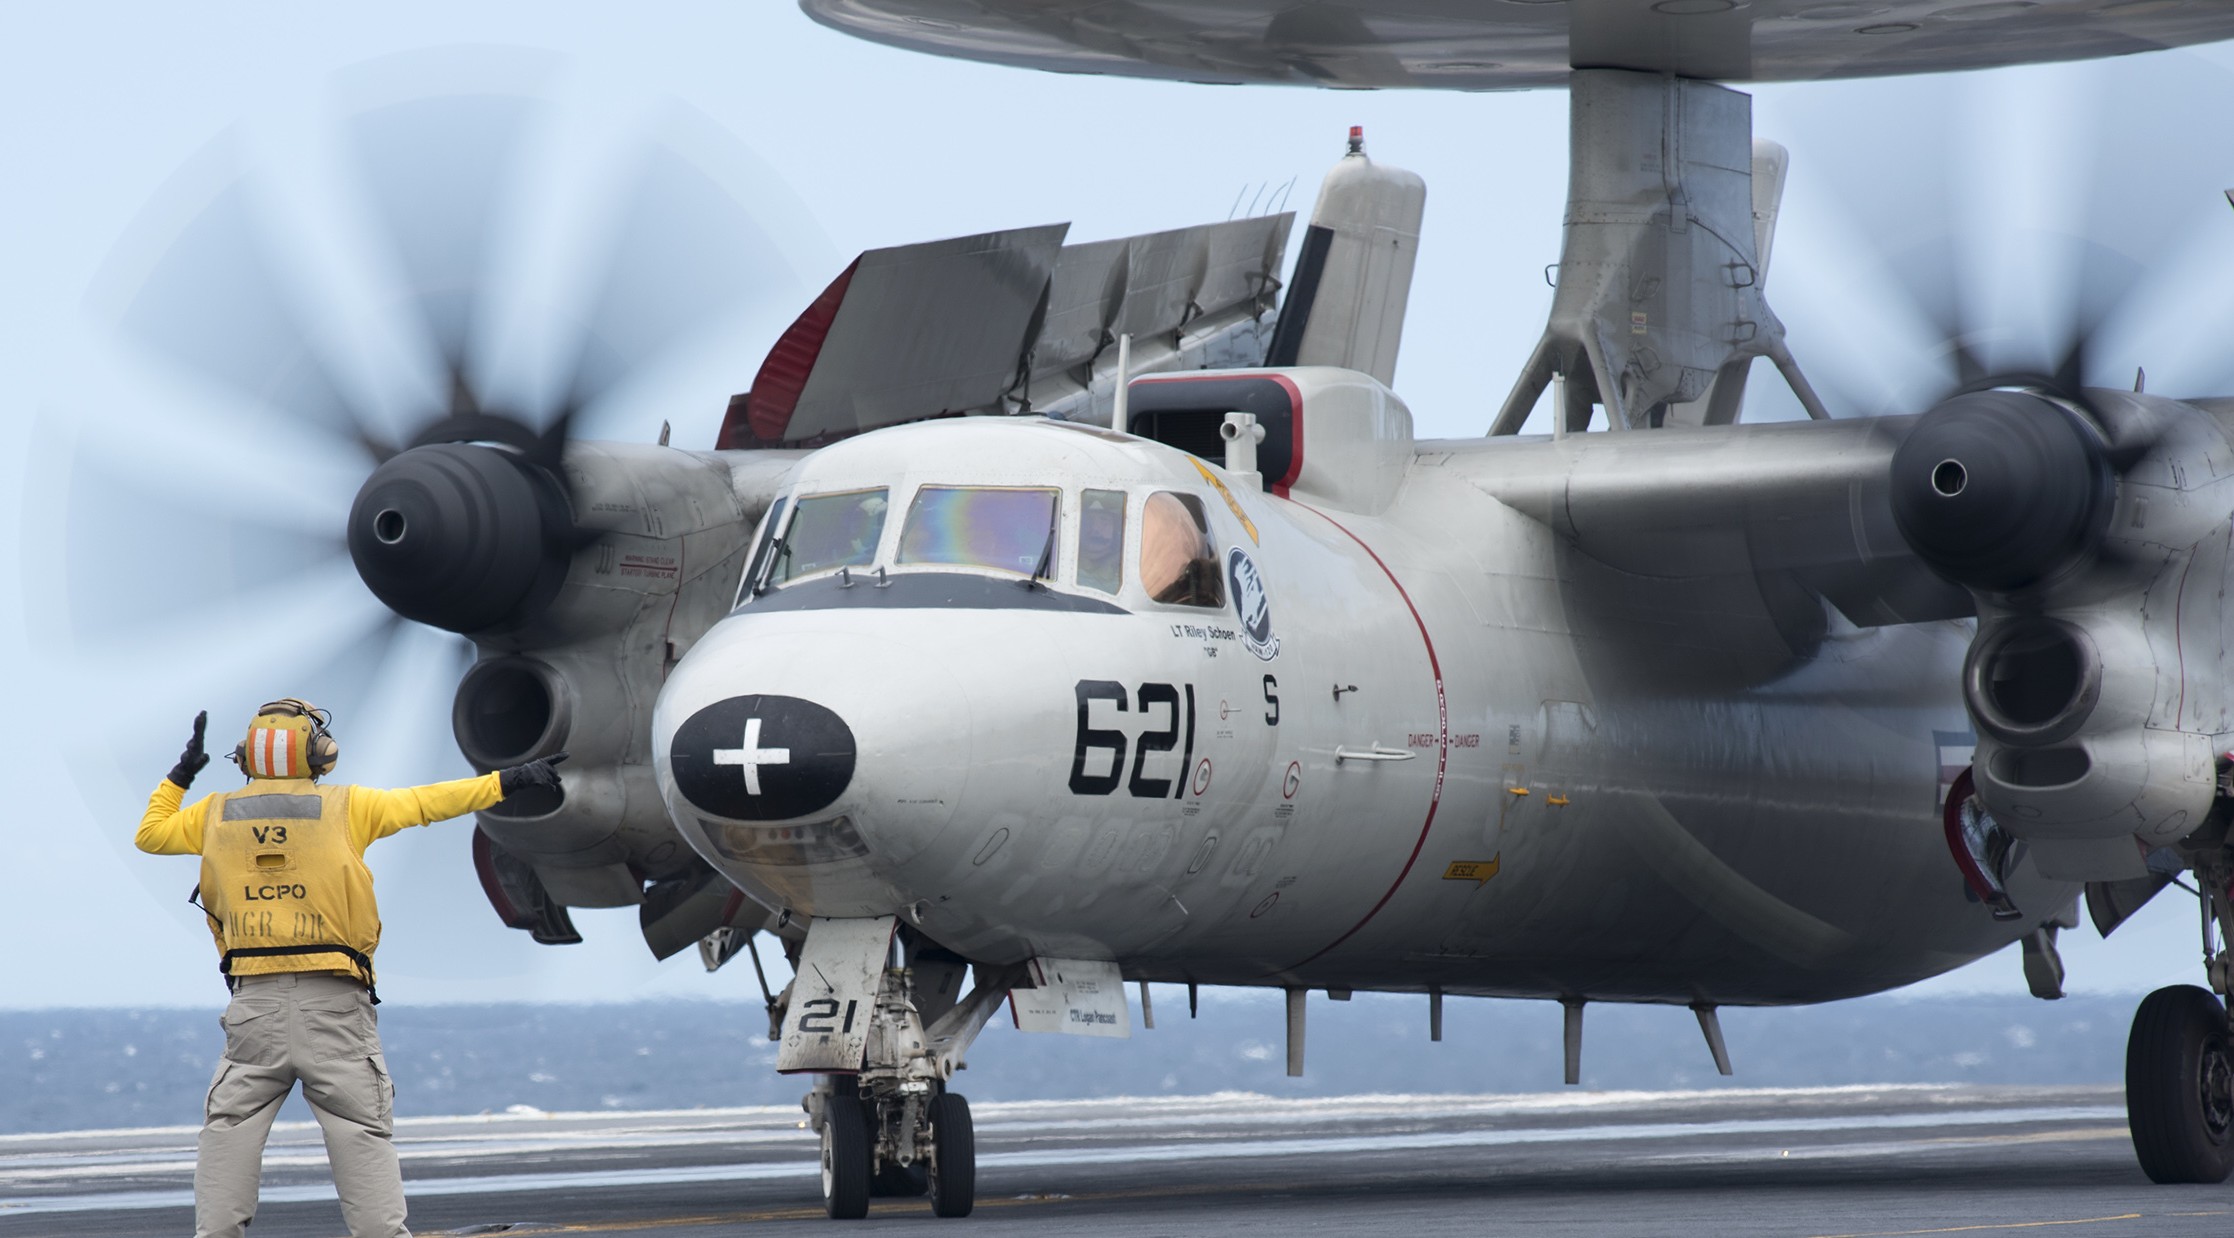 vaw-120 greyhawks carrier airborne early warning squadron e-2c hawkeye replacement uss harry s. truman cvn-75 72